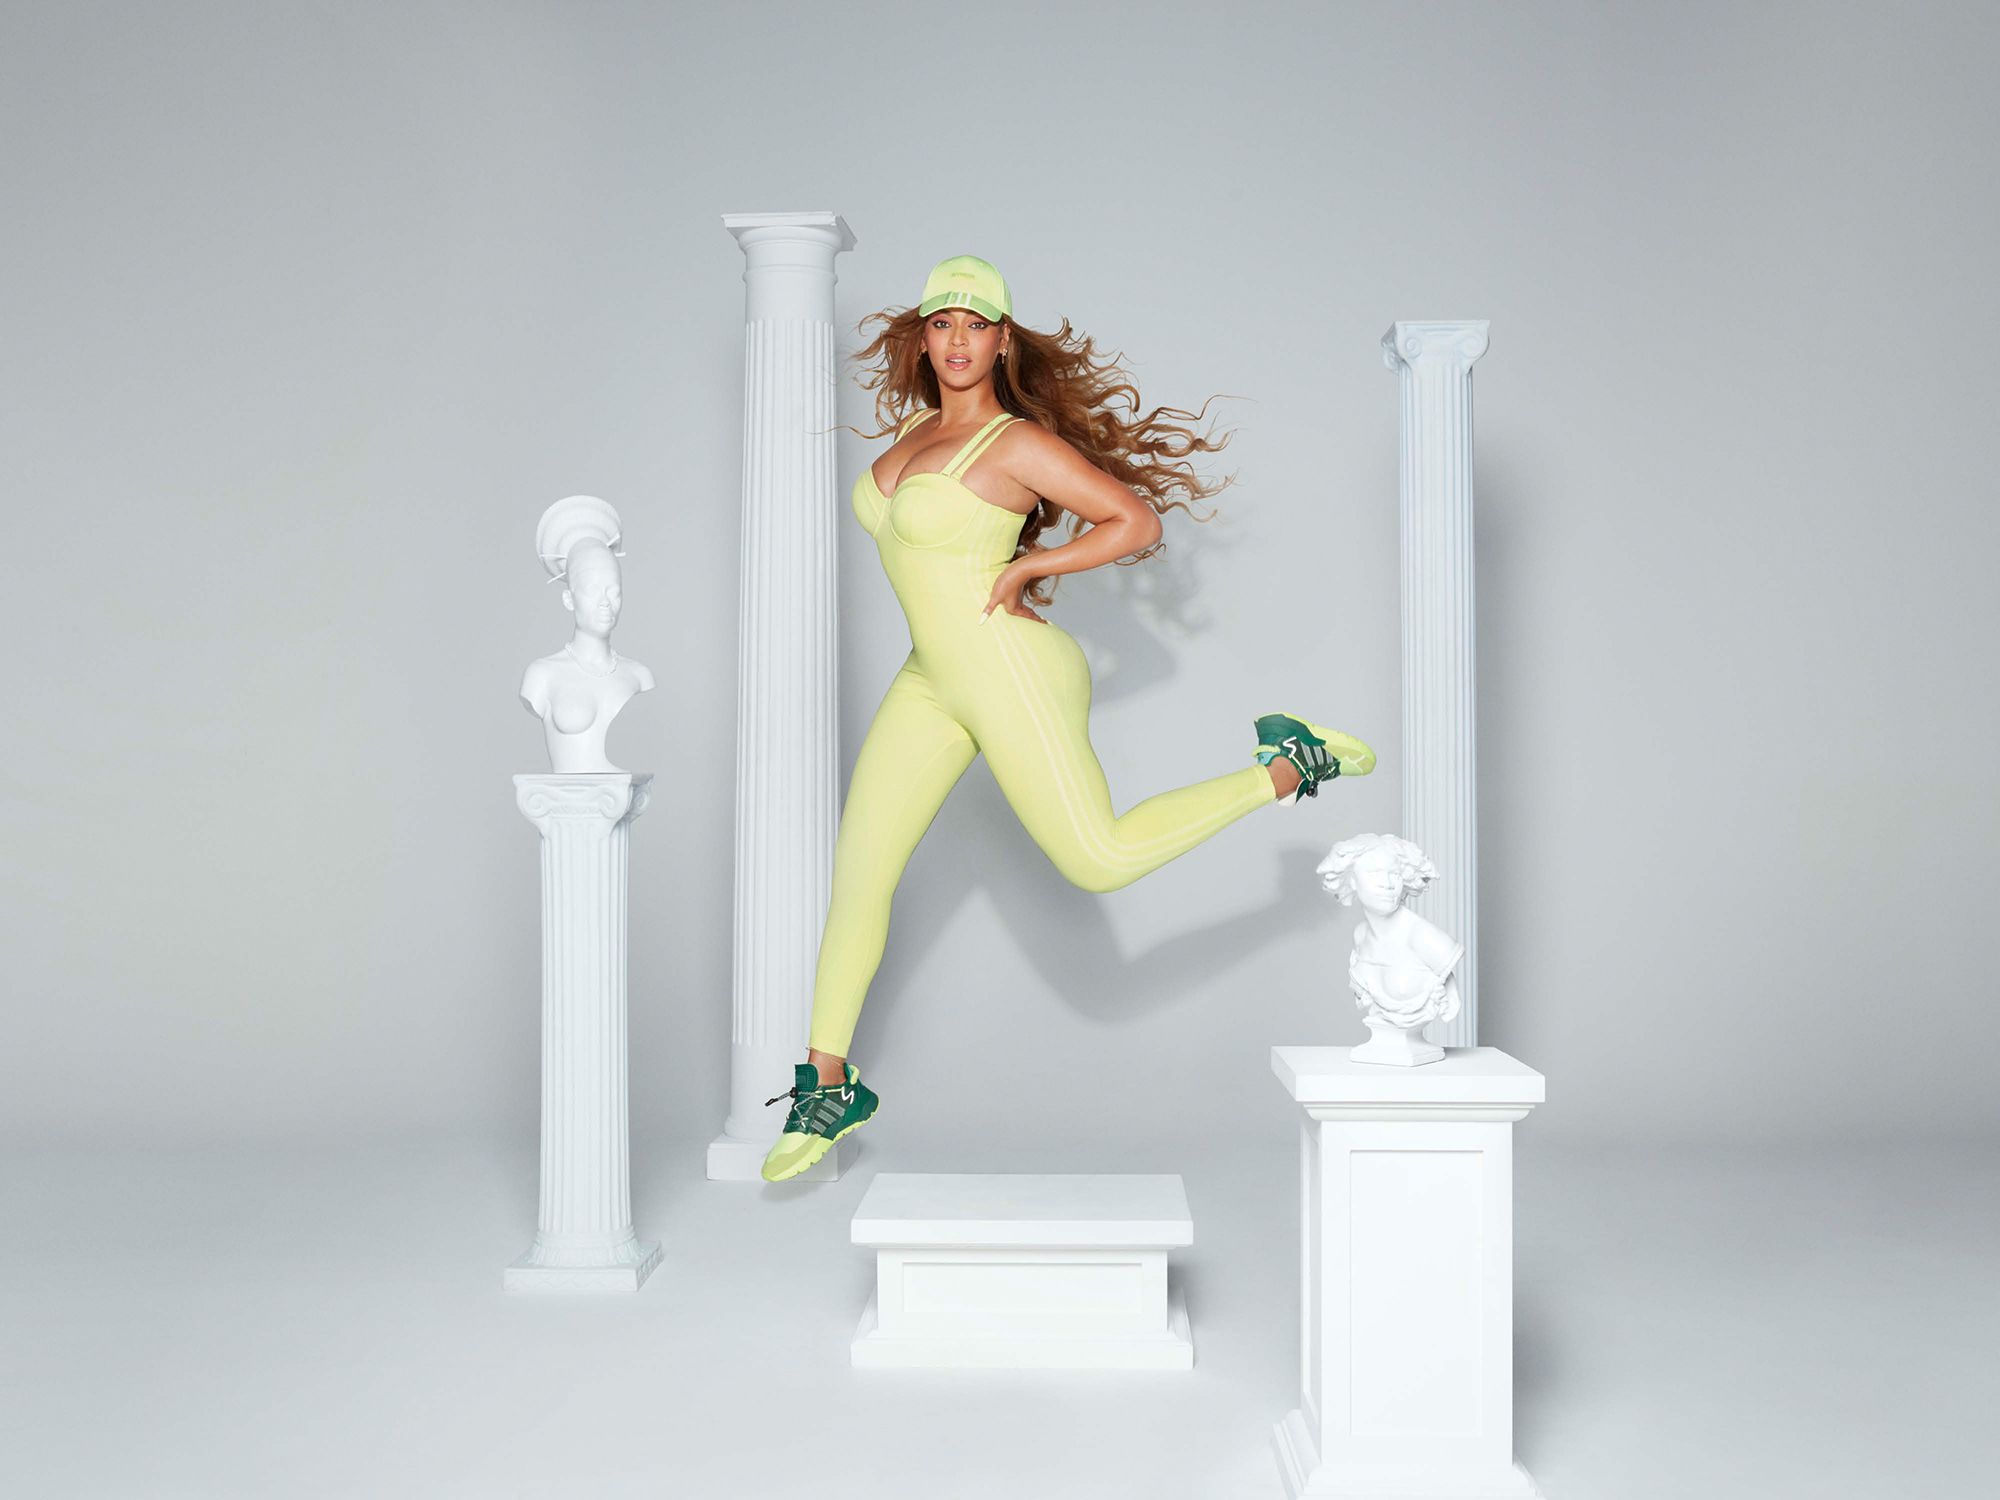 Beyoncé Drops Her First Ivy Park Collection With Adidas